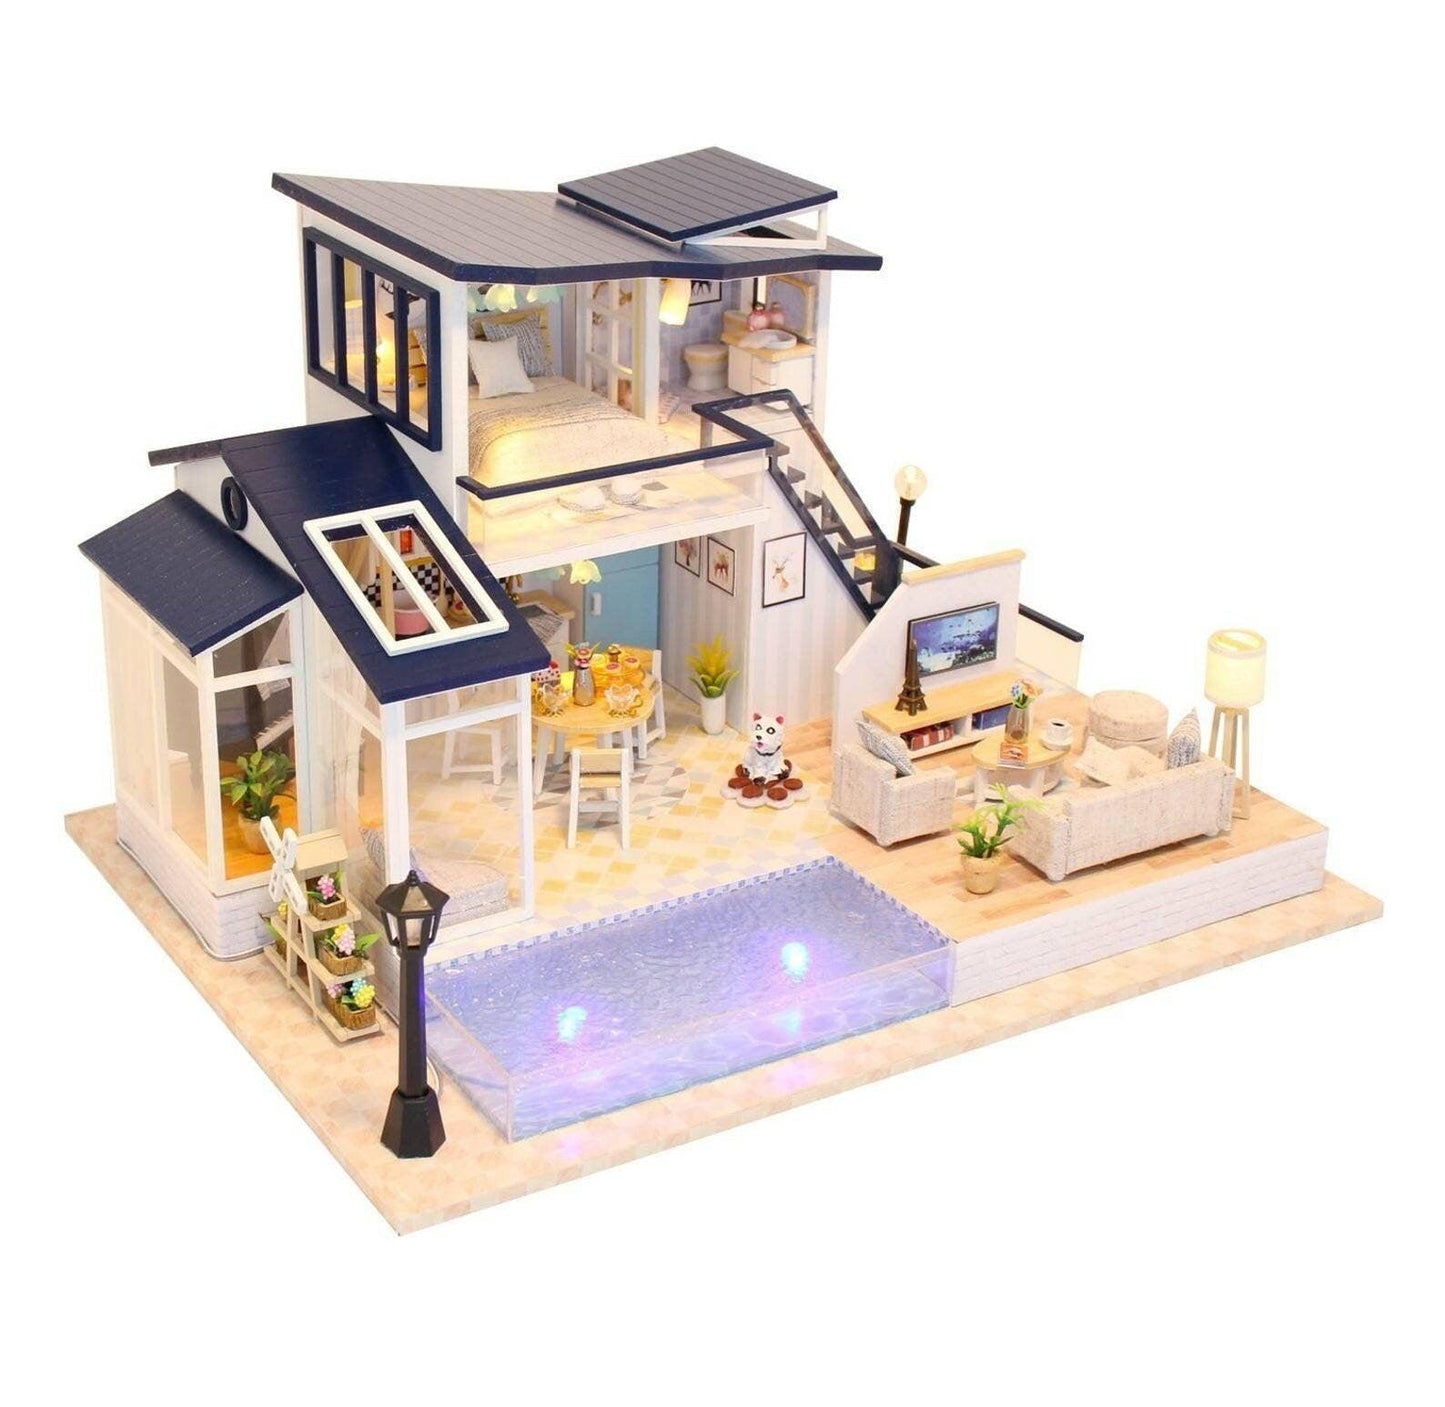 DIY Modern Party Home Miniature Doll House Kit Pool Villa With Swimming Pool with light Adult Craft Gift Decor Showpiece Decorative - Rajbharti Crafts